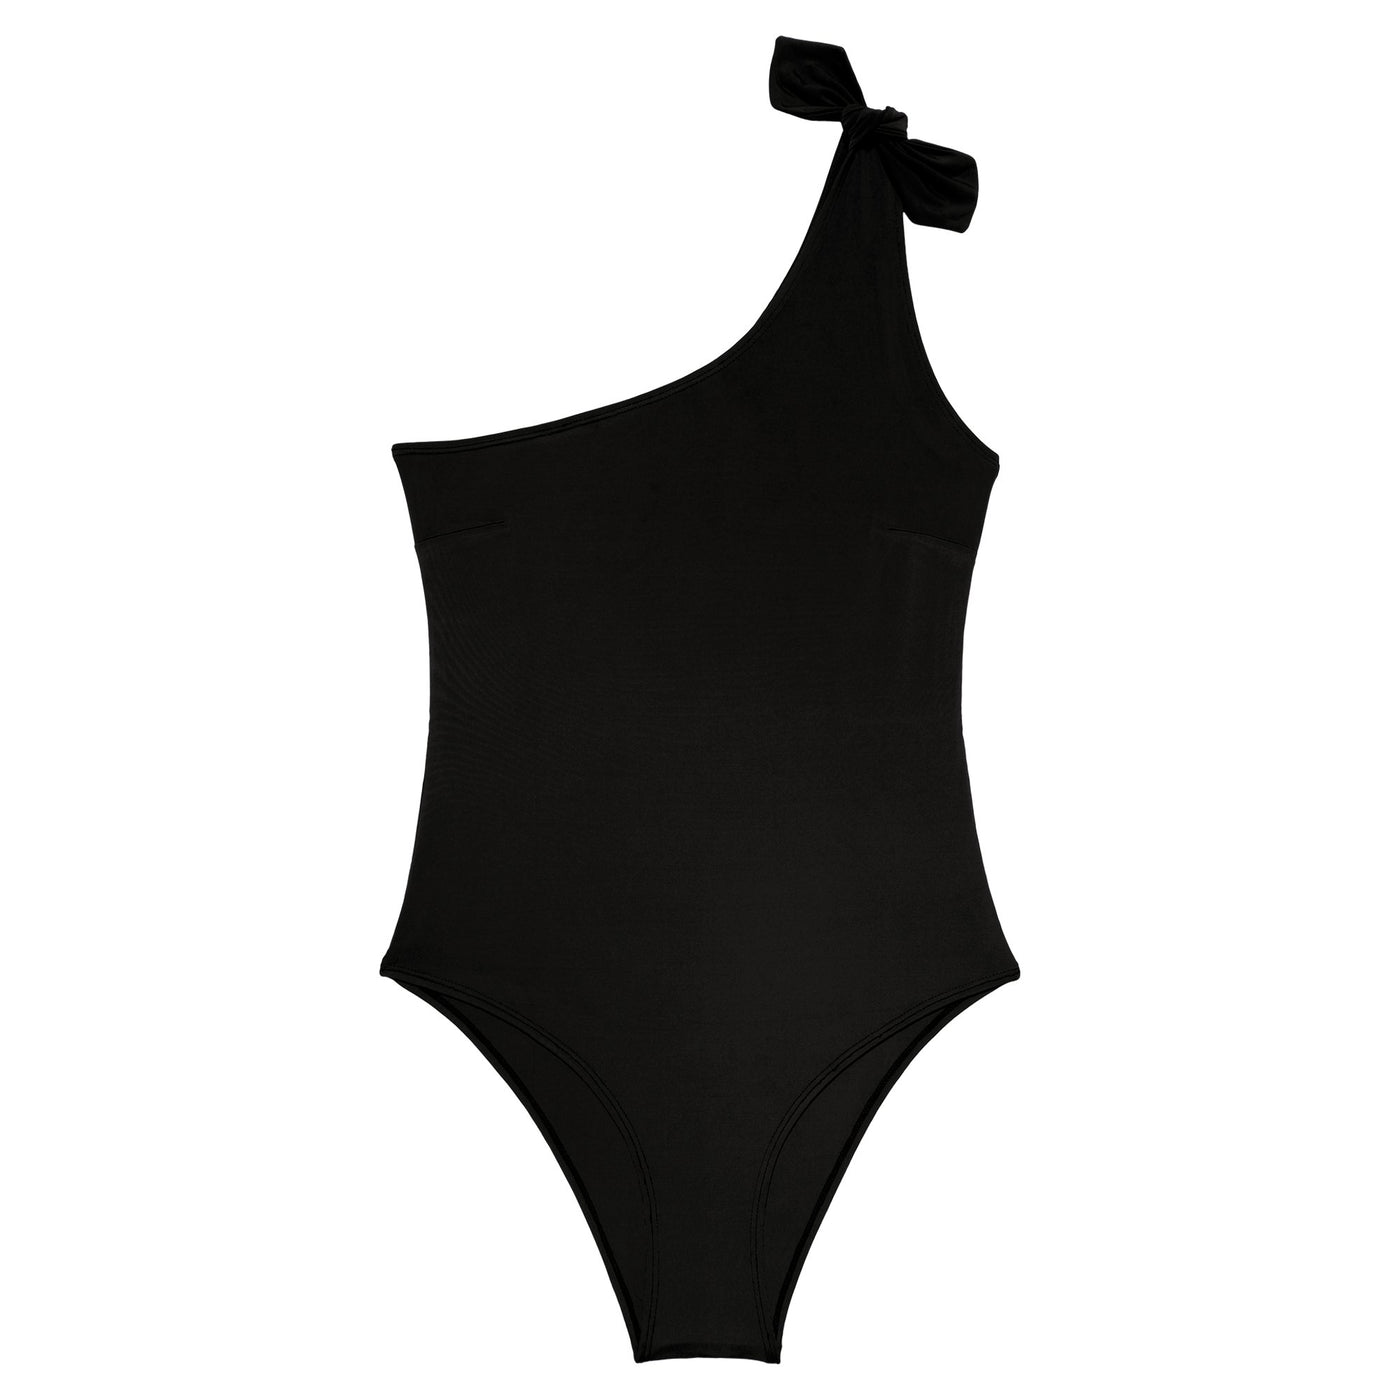 The elegant asymmetrical Manon Swimsuit is made in our soft recycled polyester fabric. Sustainable swimwear.